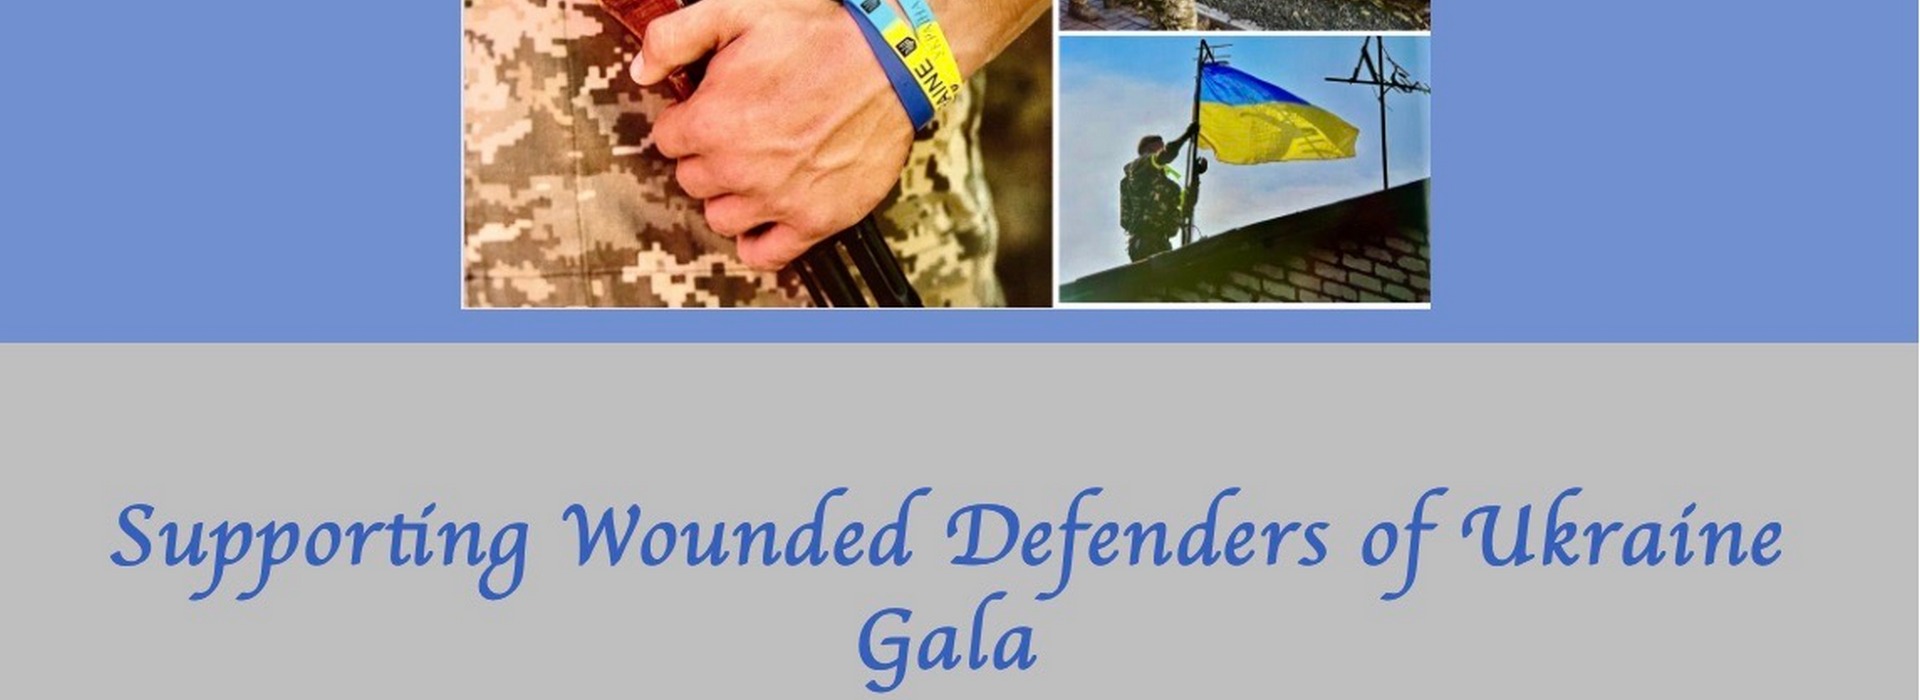 Supporting Wounded Defenders of Ukraine Gala